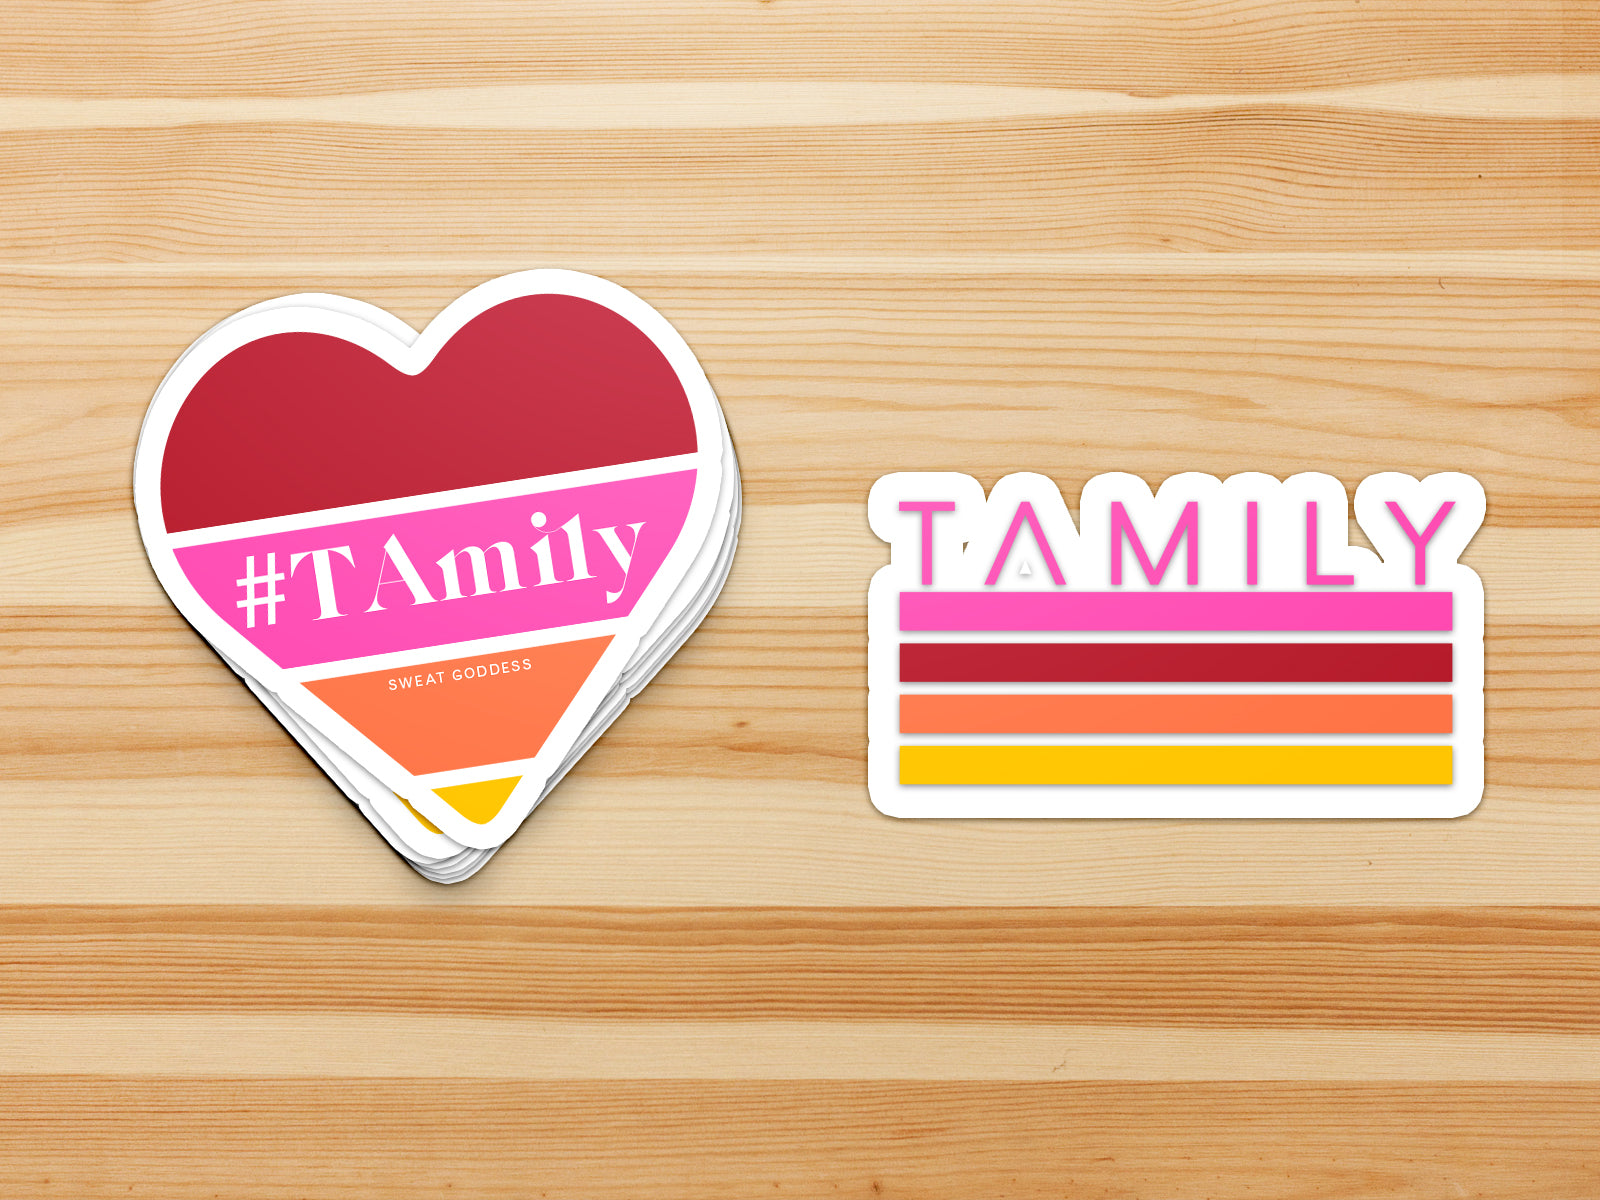 A set of 2 waterproof vinyl stickers, a heart and a stripes design with the word "Tamily"